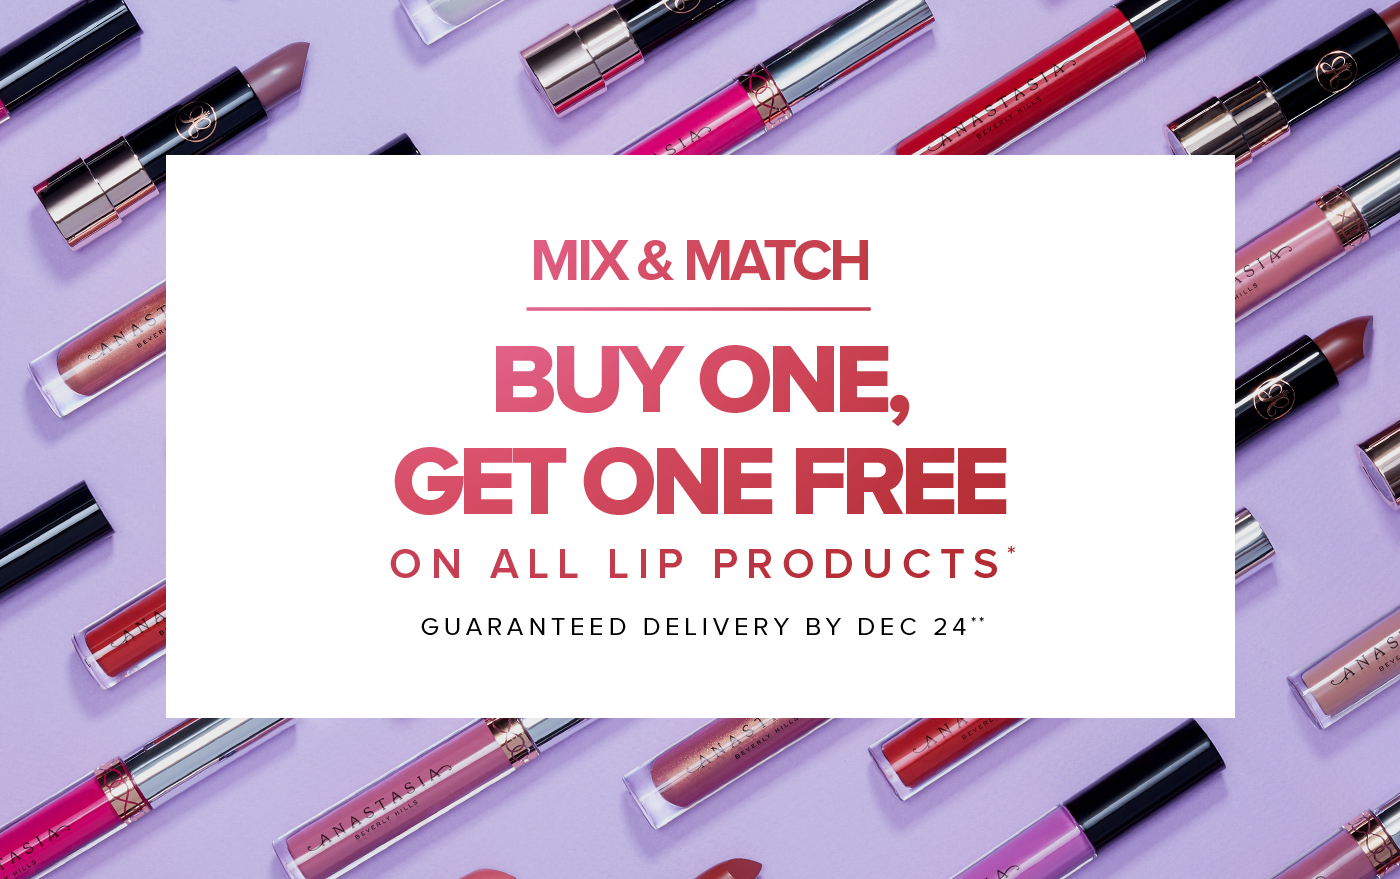 MIX & MATCH BUY ONE, GET ONE FREE ON ALL LIP PRODUCTS* GUARANTEED DELIVERY BY DEC 24**